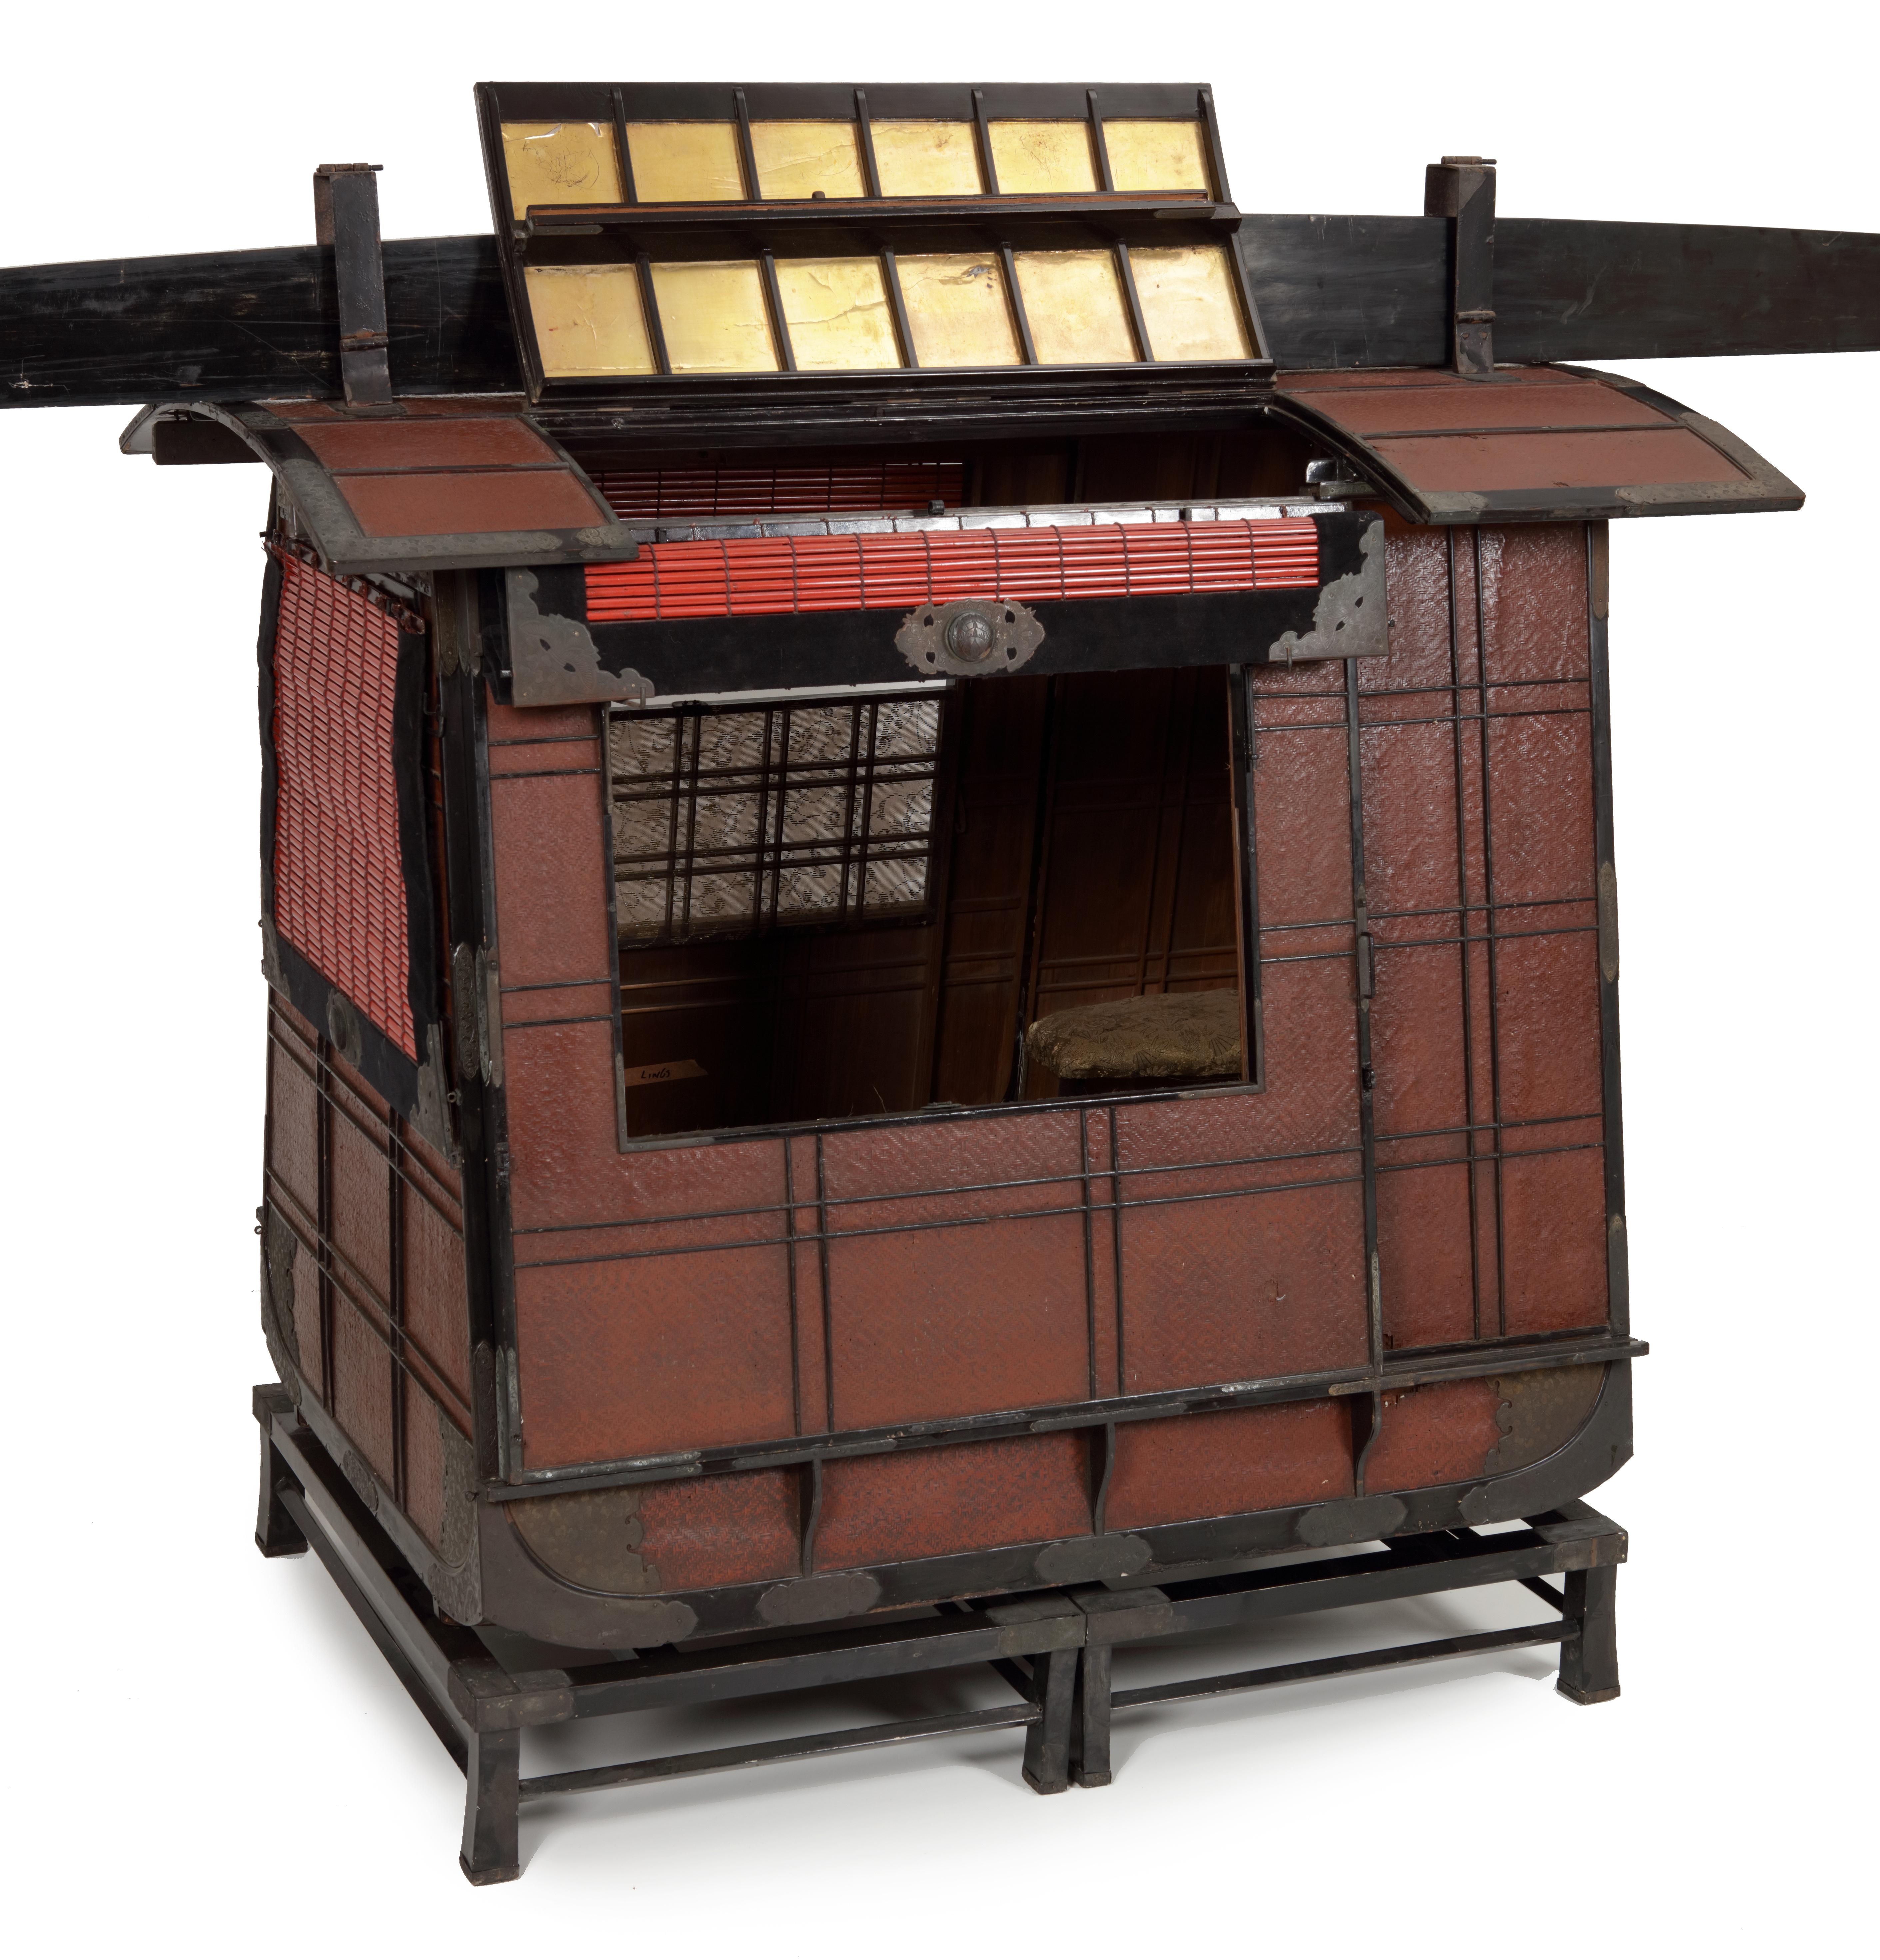 A Japanese red and black lacquered palanquin or norimono

Edo period, early 19th century
 
Made of lacquered wood, latticework and bamboo, black velvet and gauze with gilt scrolling vine decorations, sliding doors and roll-down shutters and